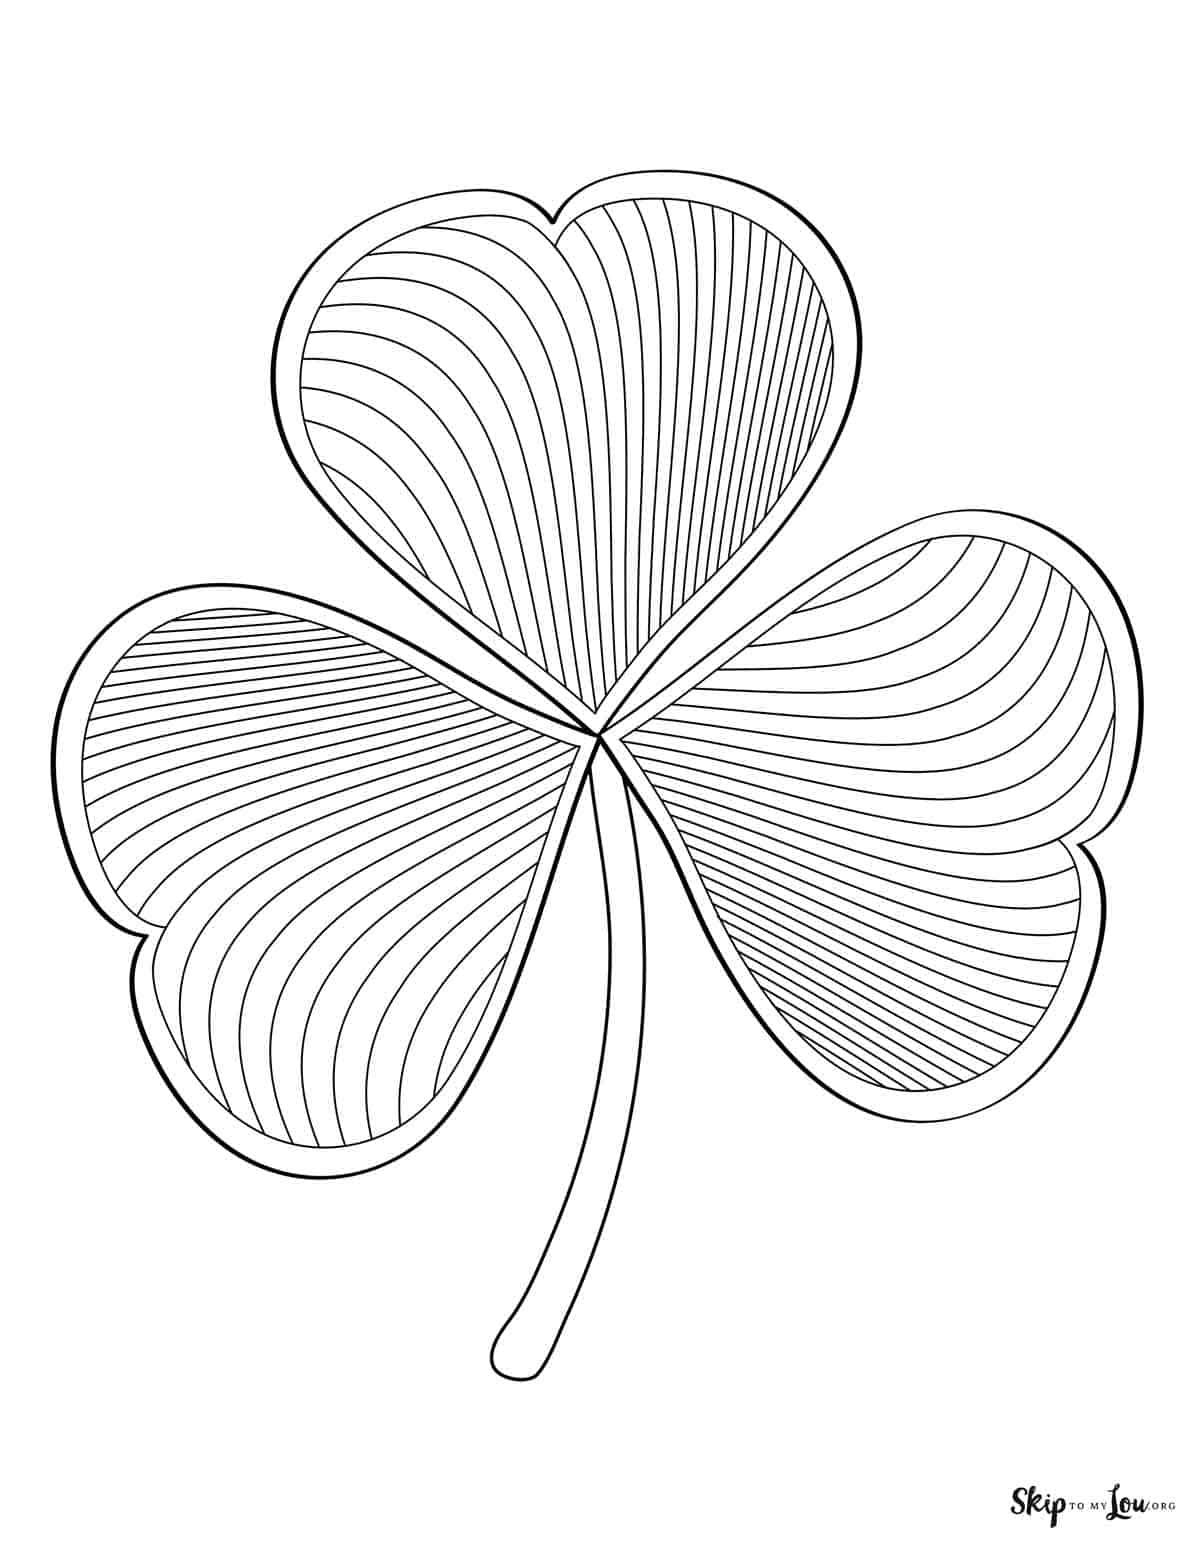 pattered shamrock coloring page